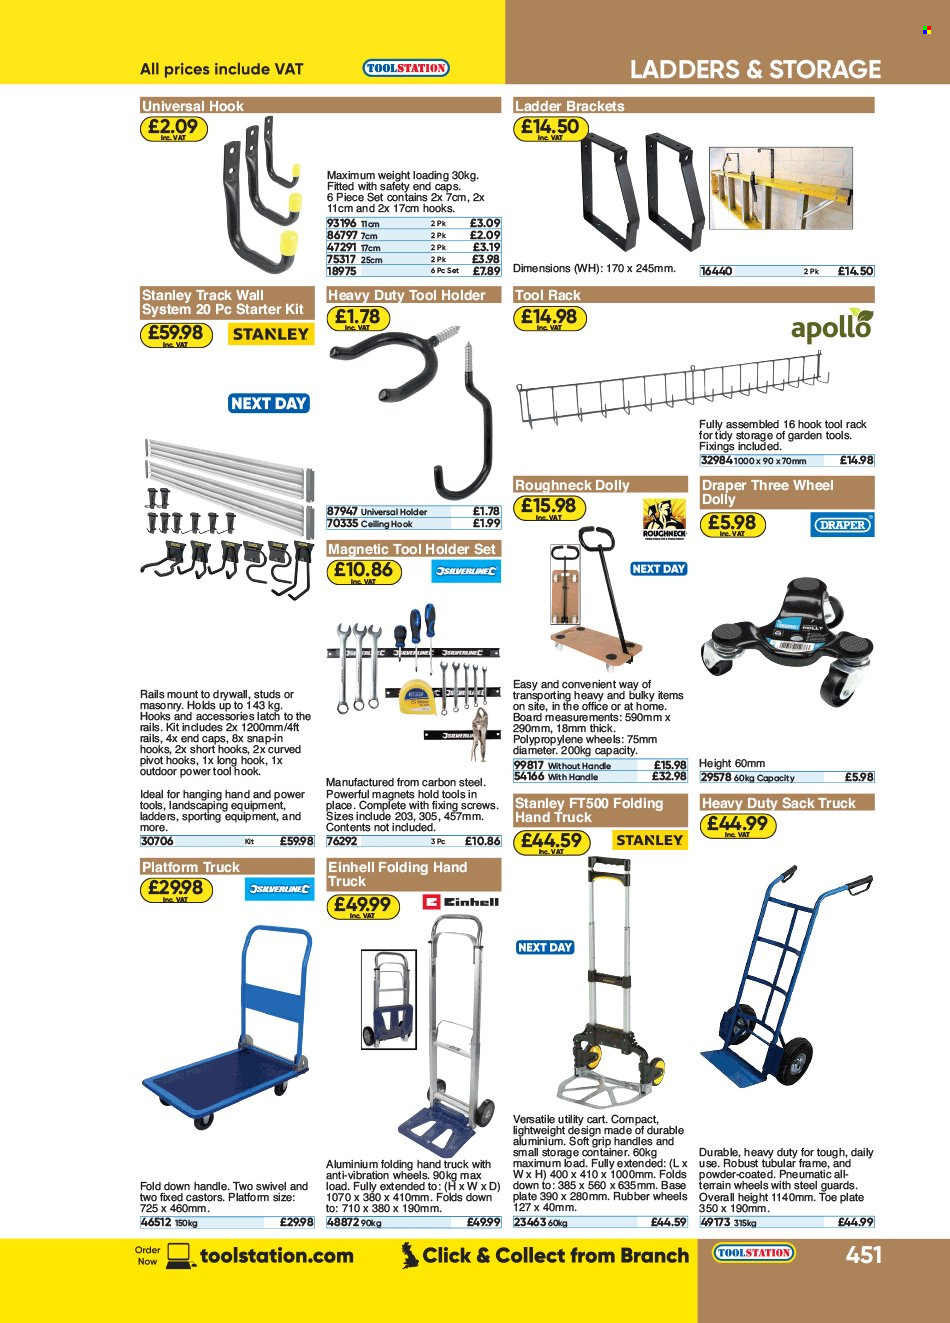 thumbnail - Toolstation offer  - Sales products - ladder, Stanley, power tools, cart, hand truck, platform truck, tool holder, container. Page 451.